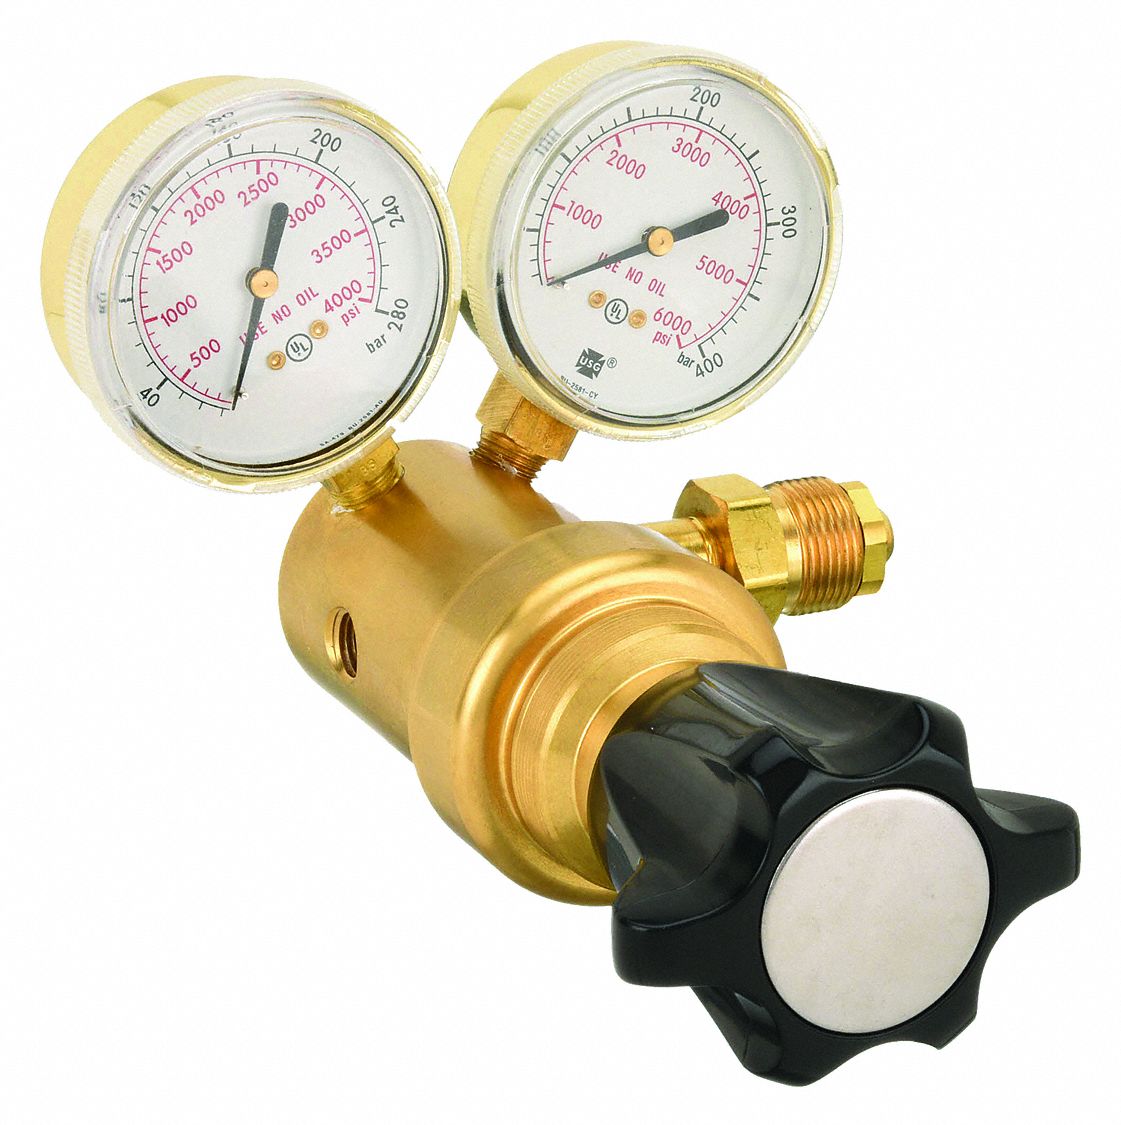 HARRIS, Two Stage, CGA 590 Inlet, Specialty Gas Regulator - 30AA63